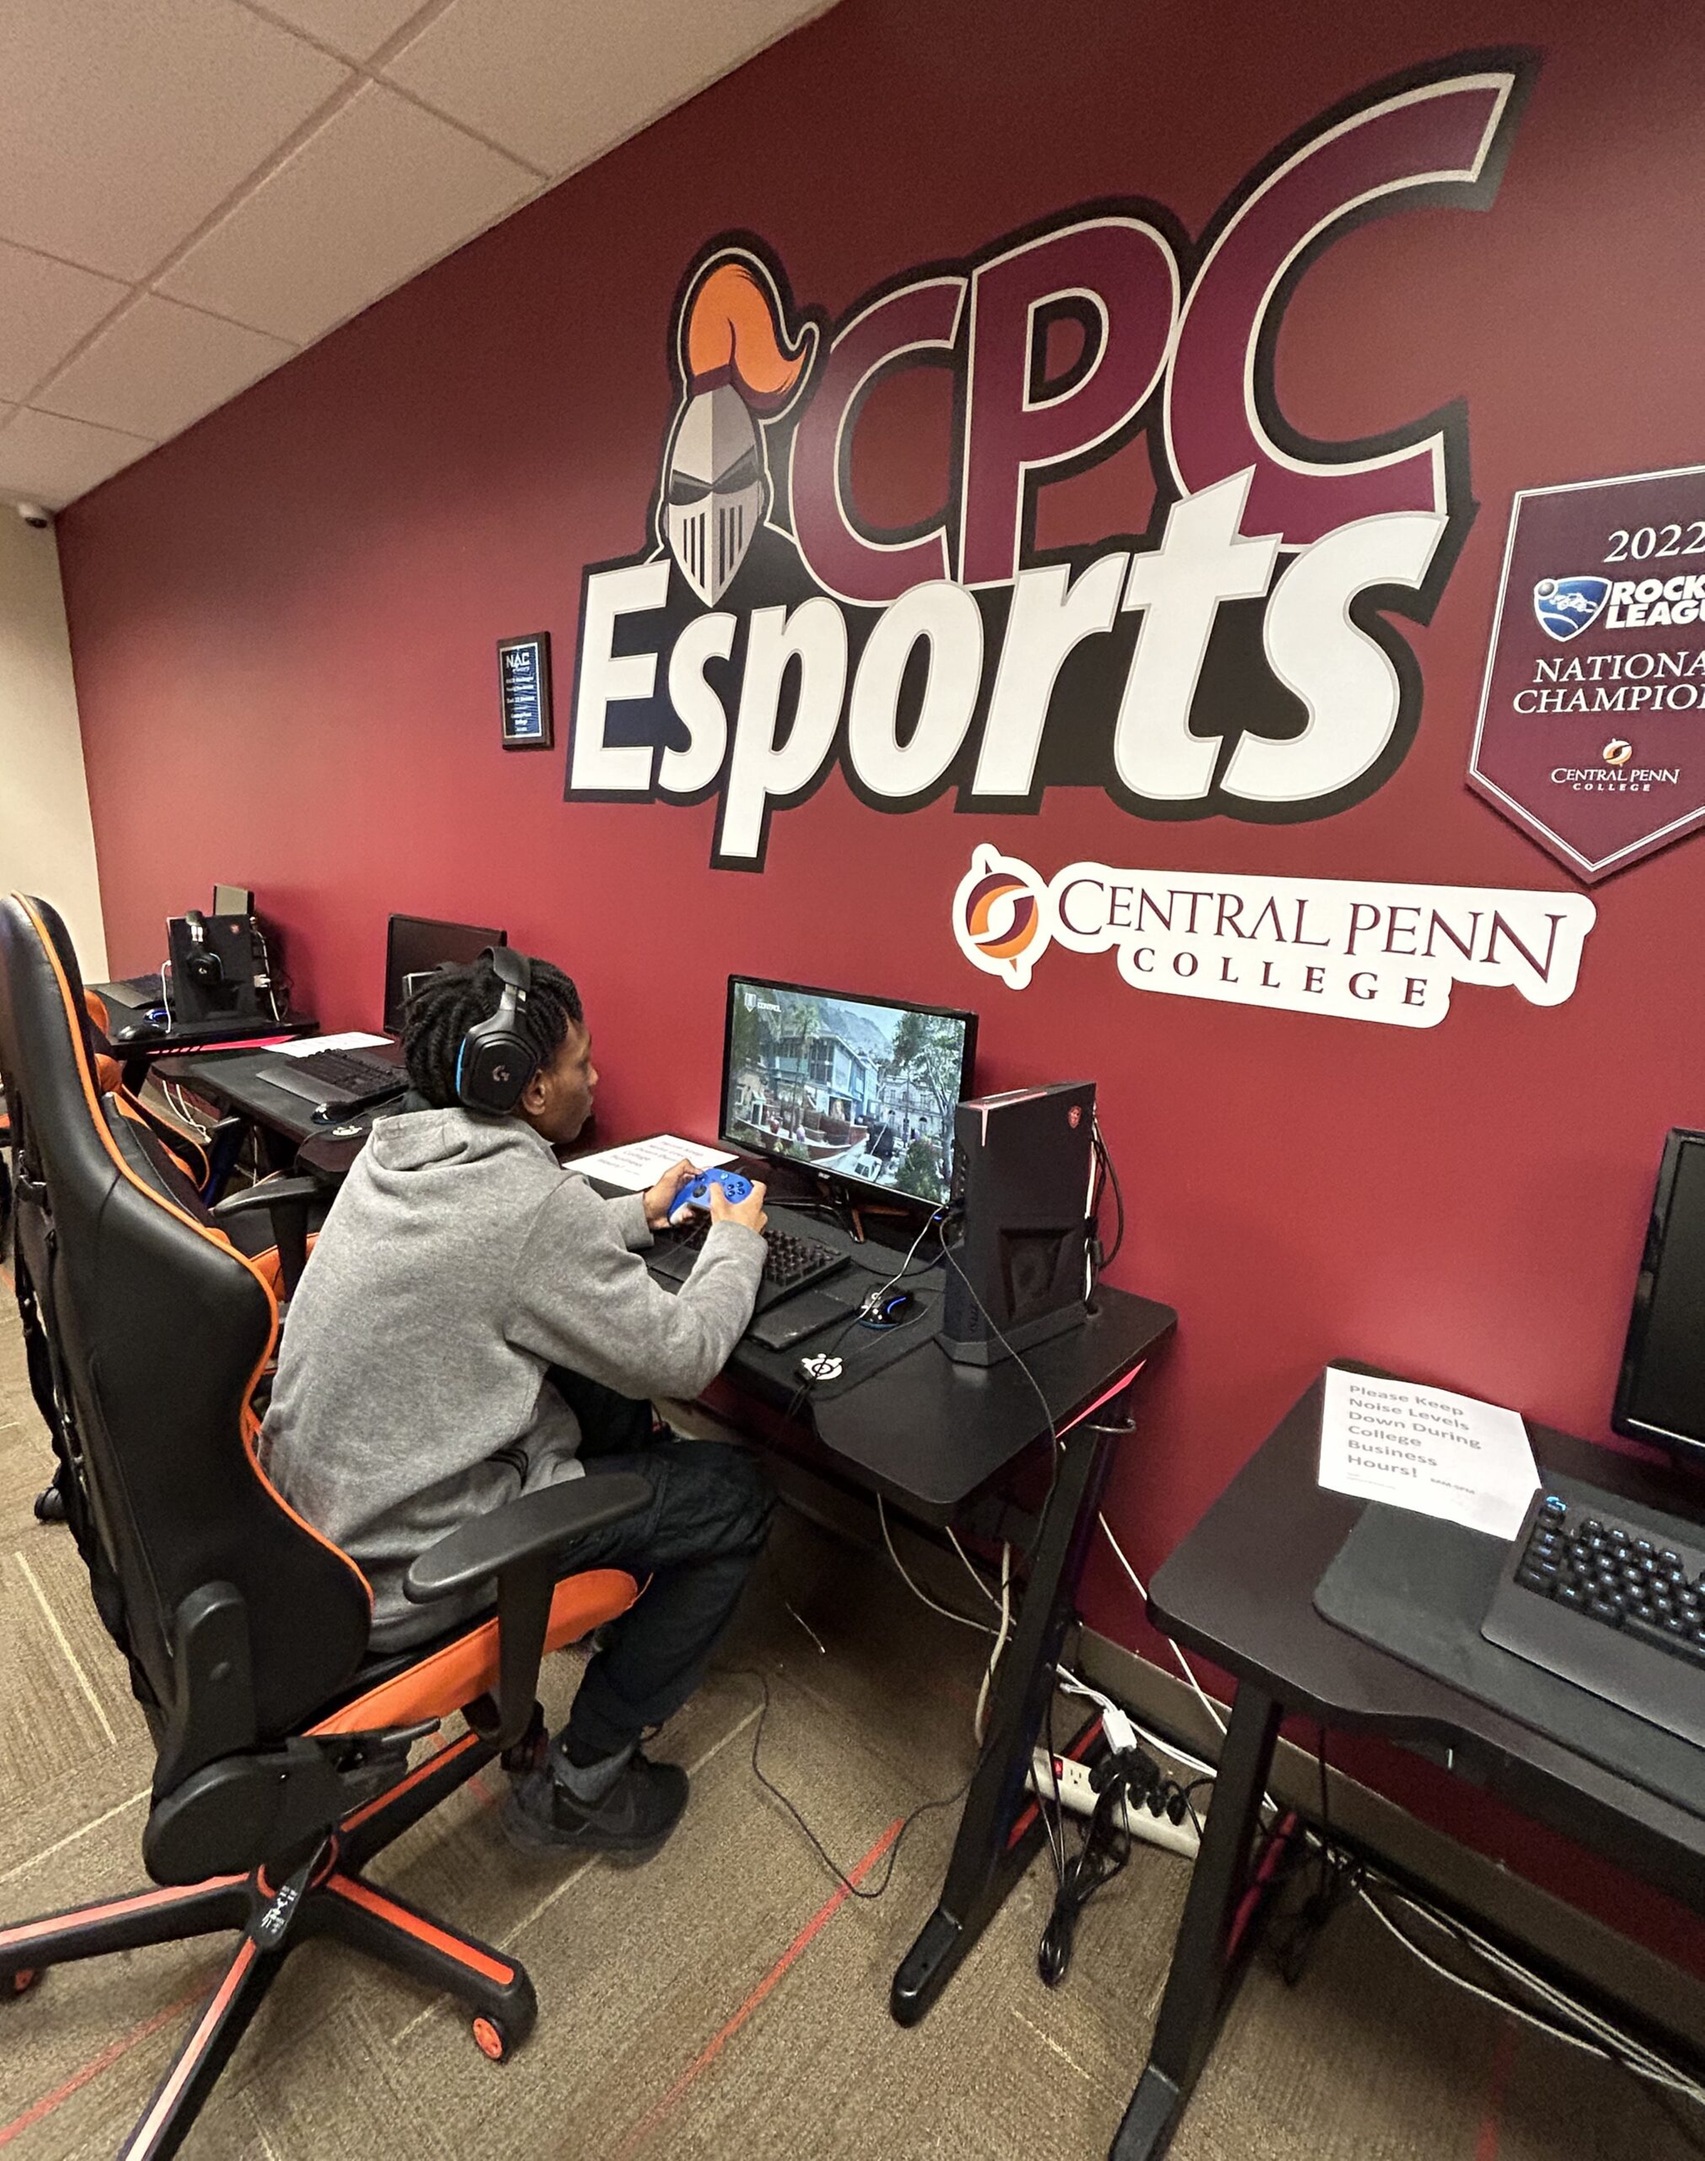 Central Penn esports team looks forward to showing its skills again